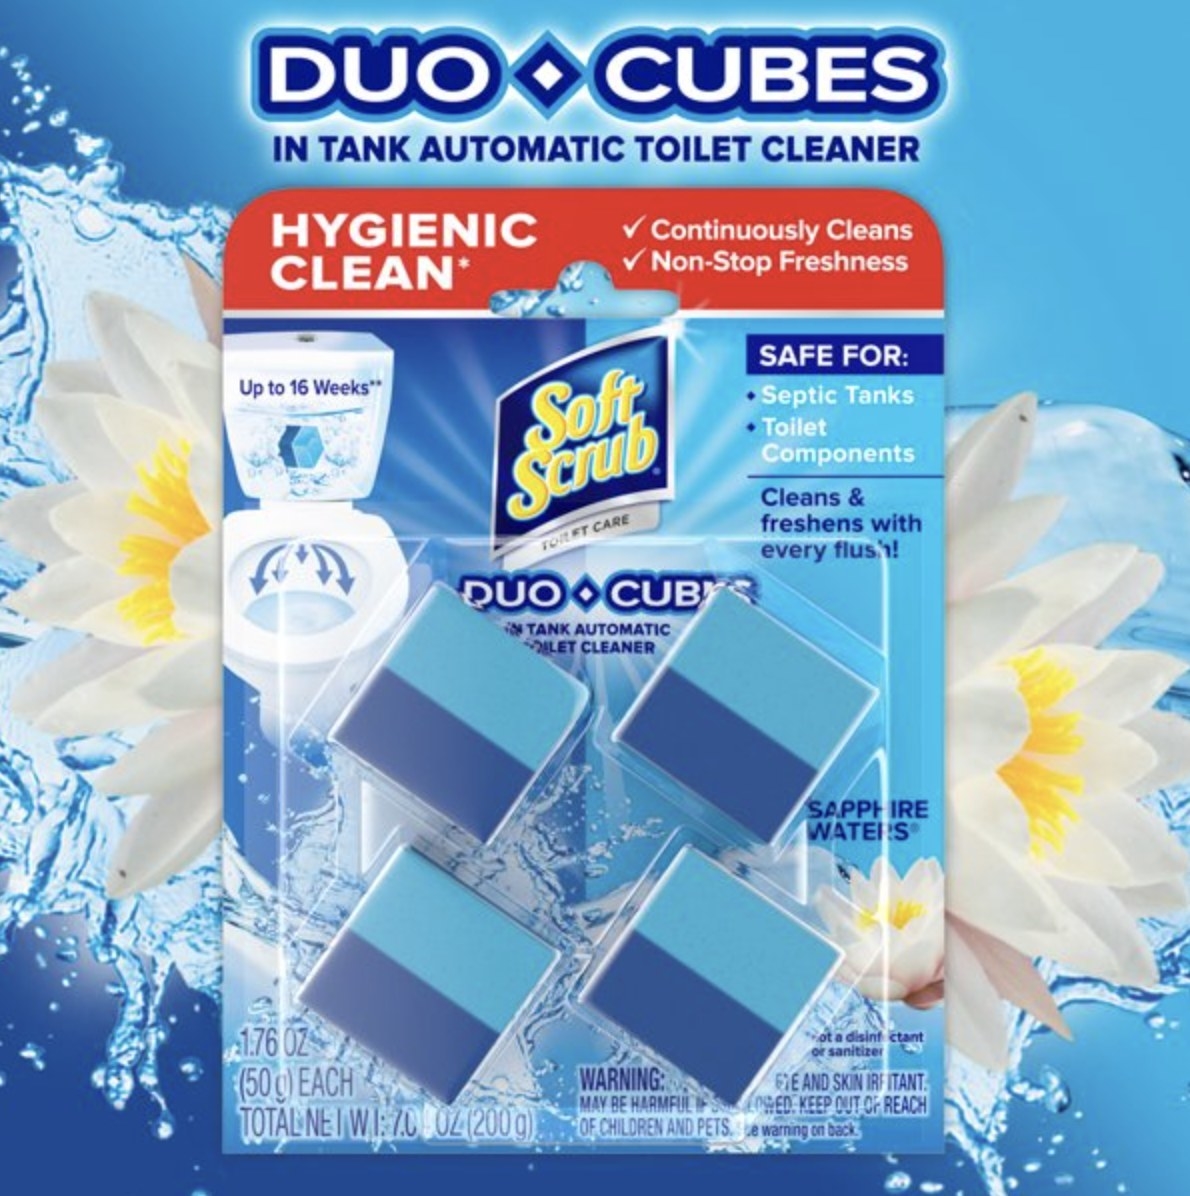 The duo cubes